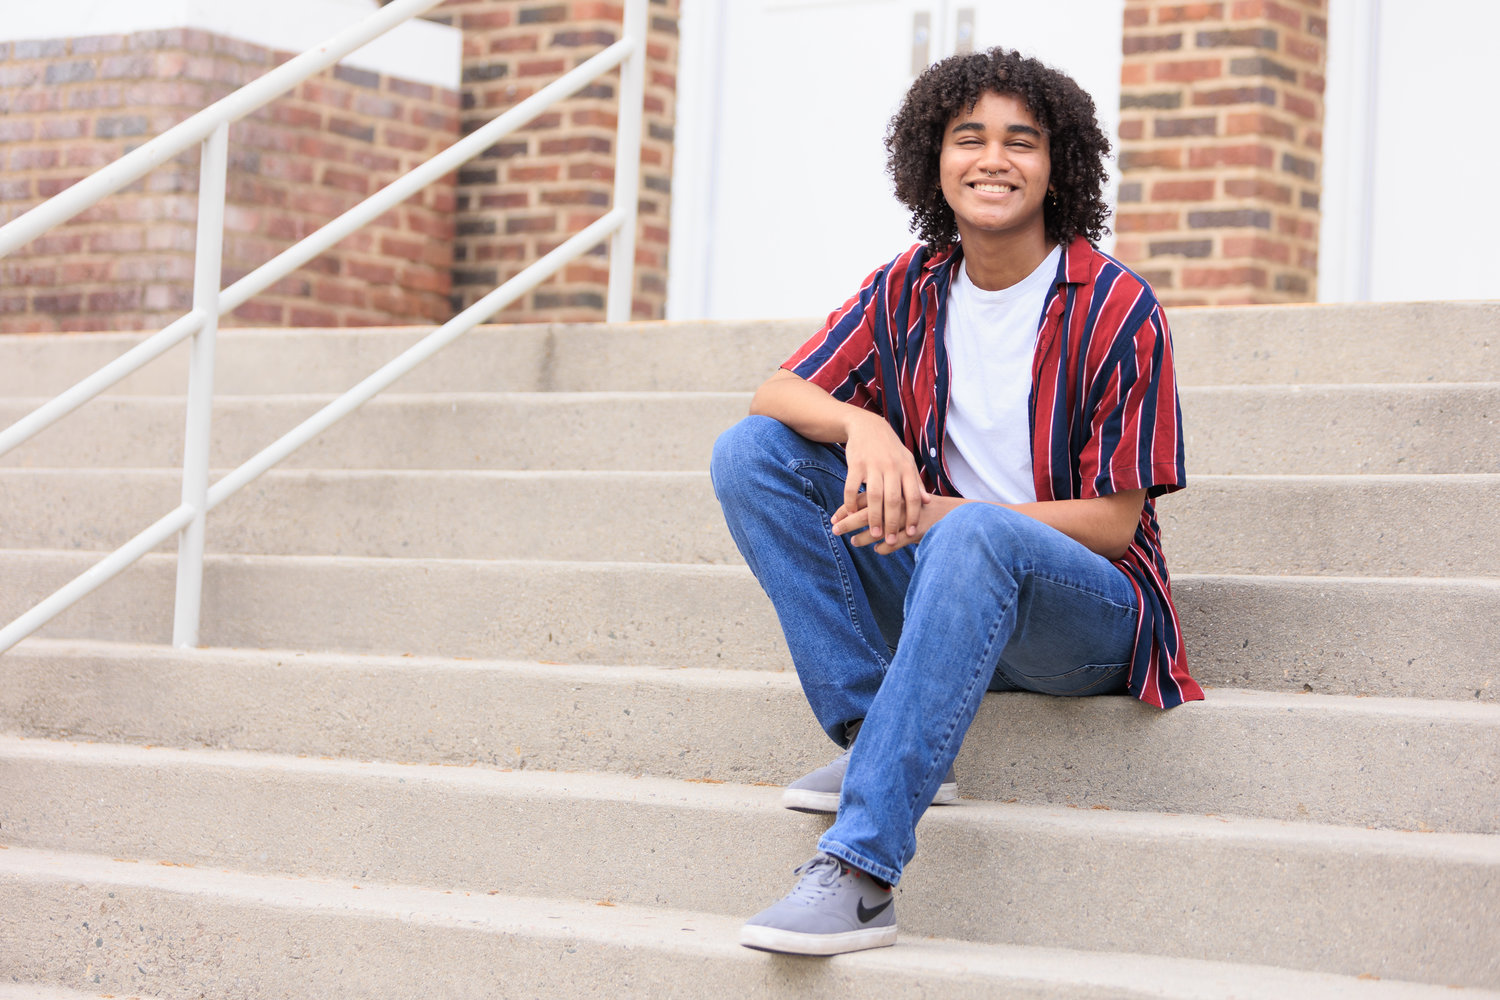 Gavin Lawrence, who will graduate from Massey Hill Classical High School this year, hopes to study to become a psychiatrist to help people with mental illness.